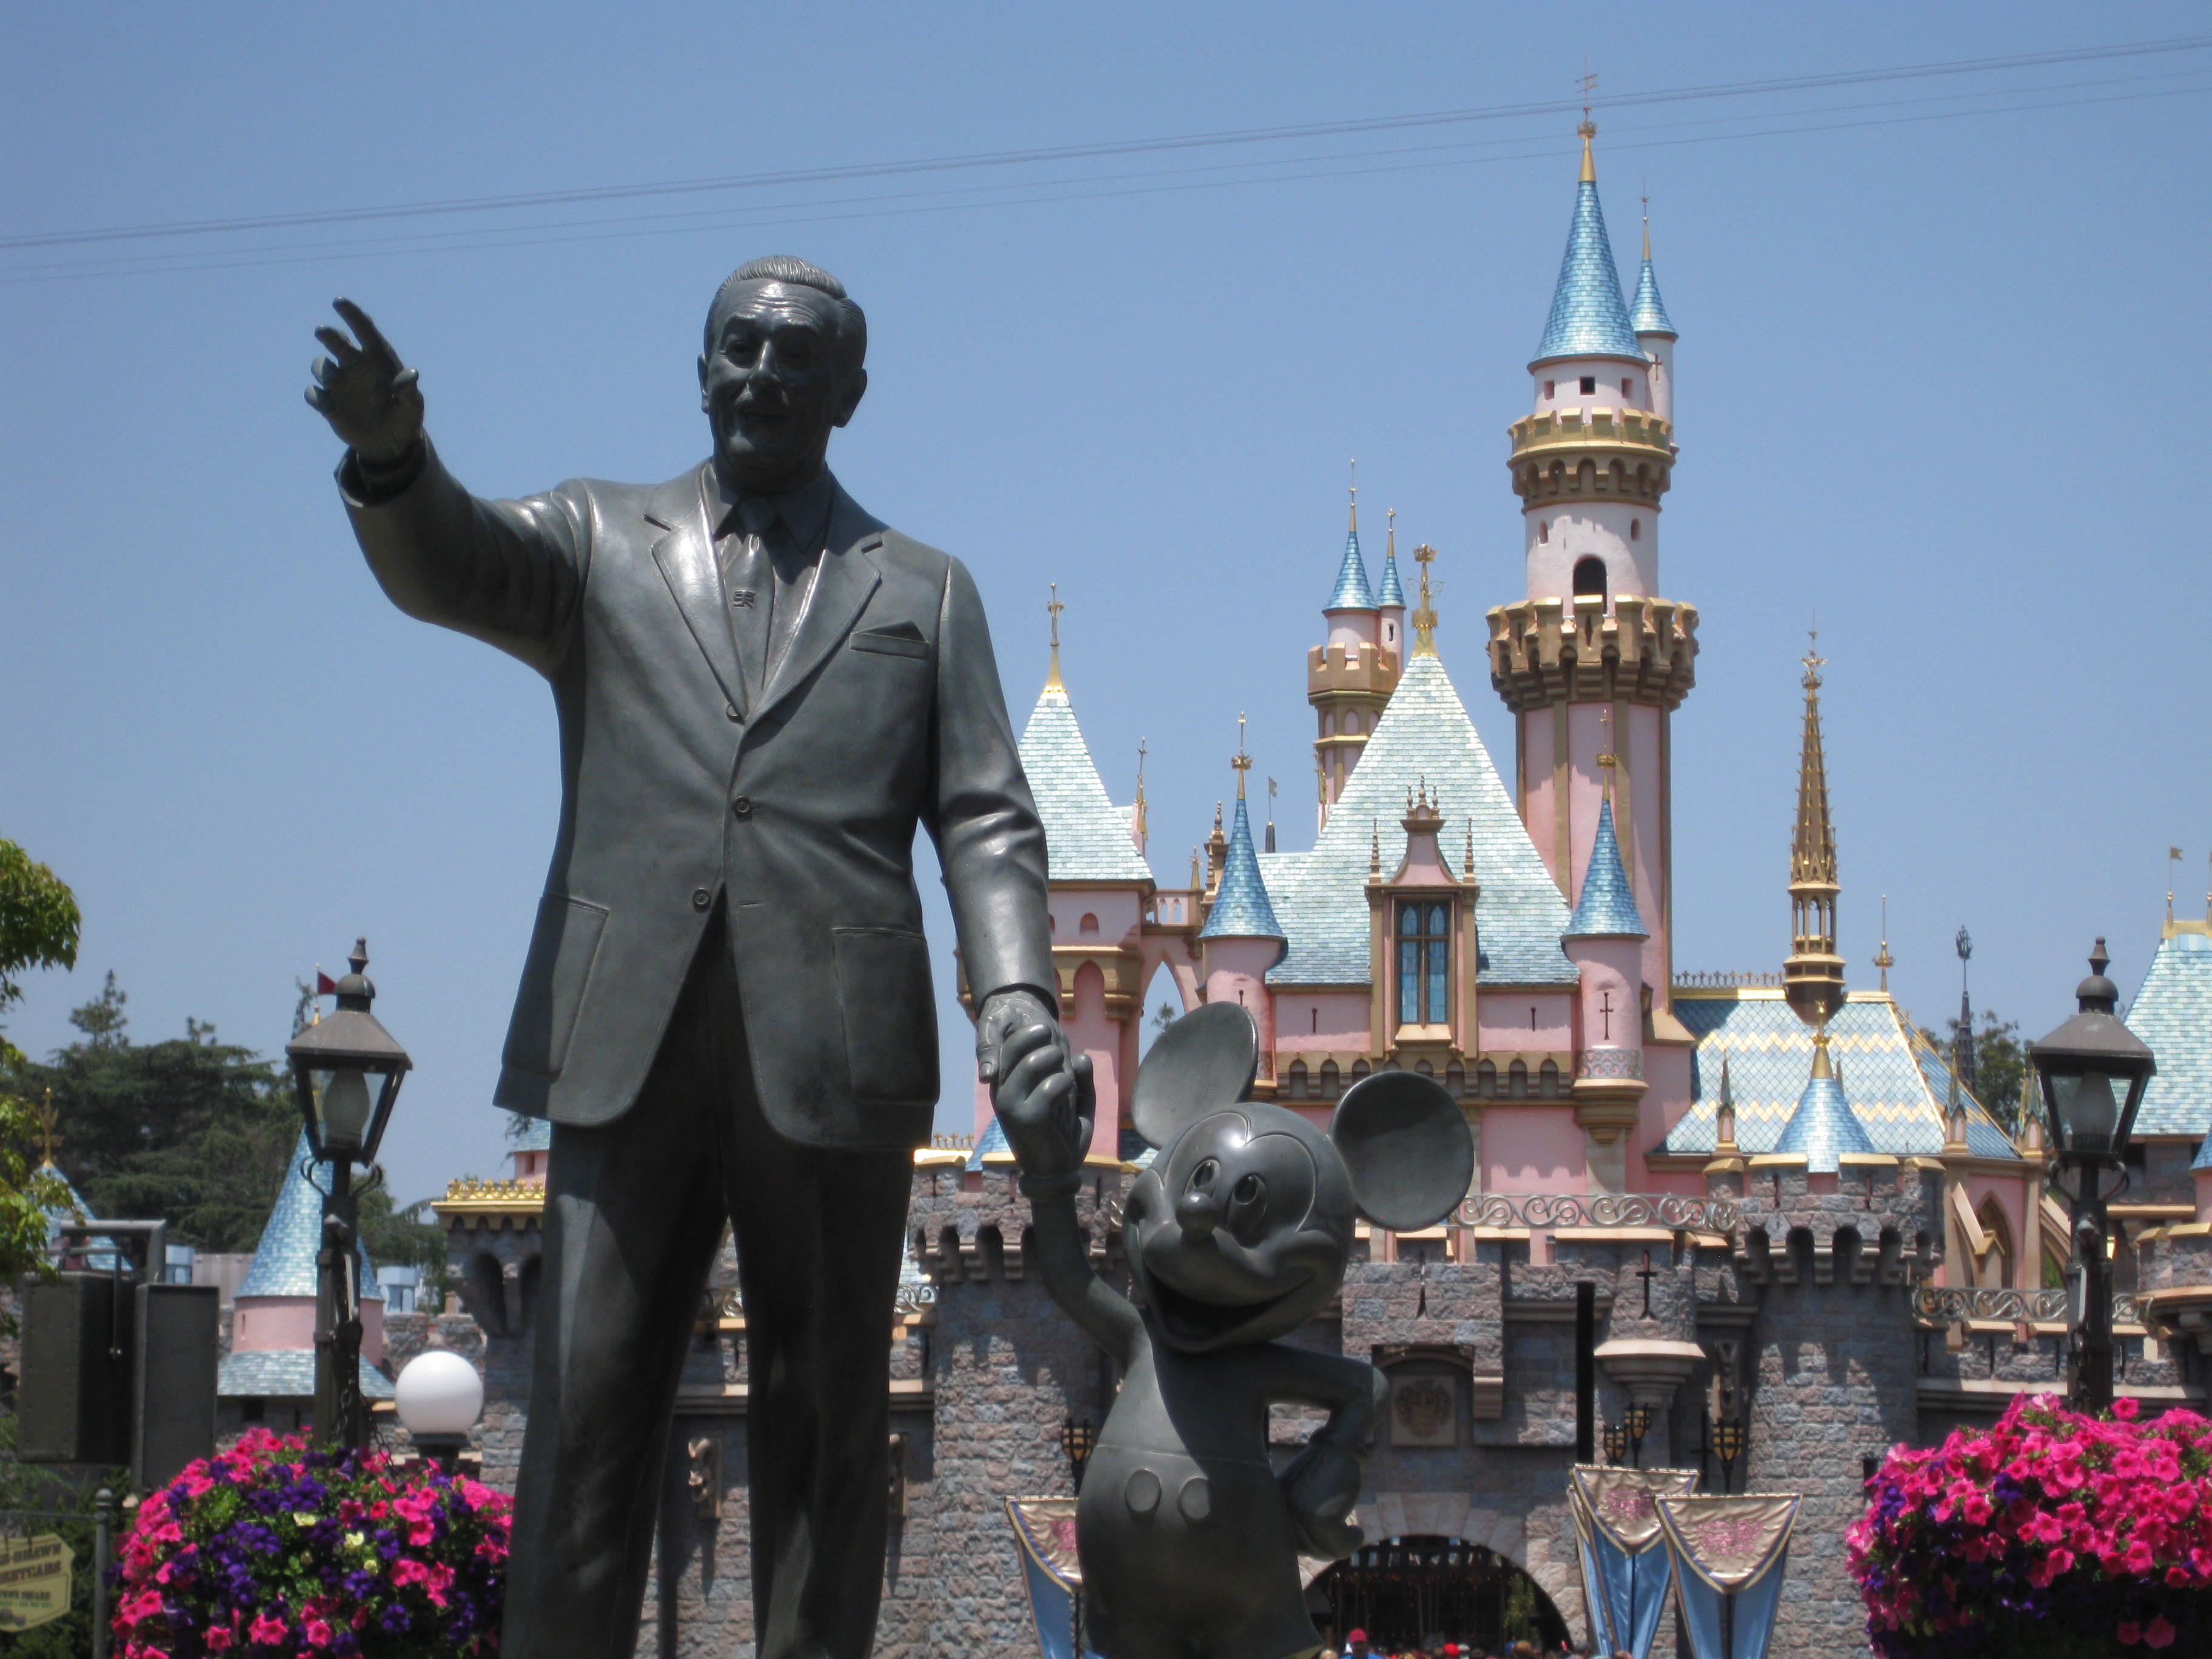 I Bet You Didn’t Know: Fun Facts about Disneyland